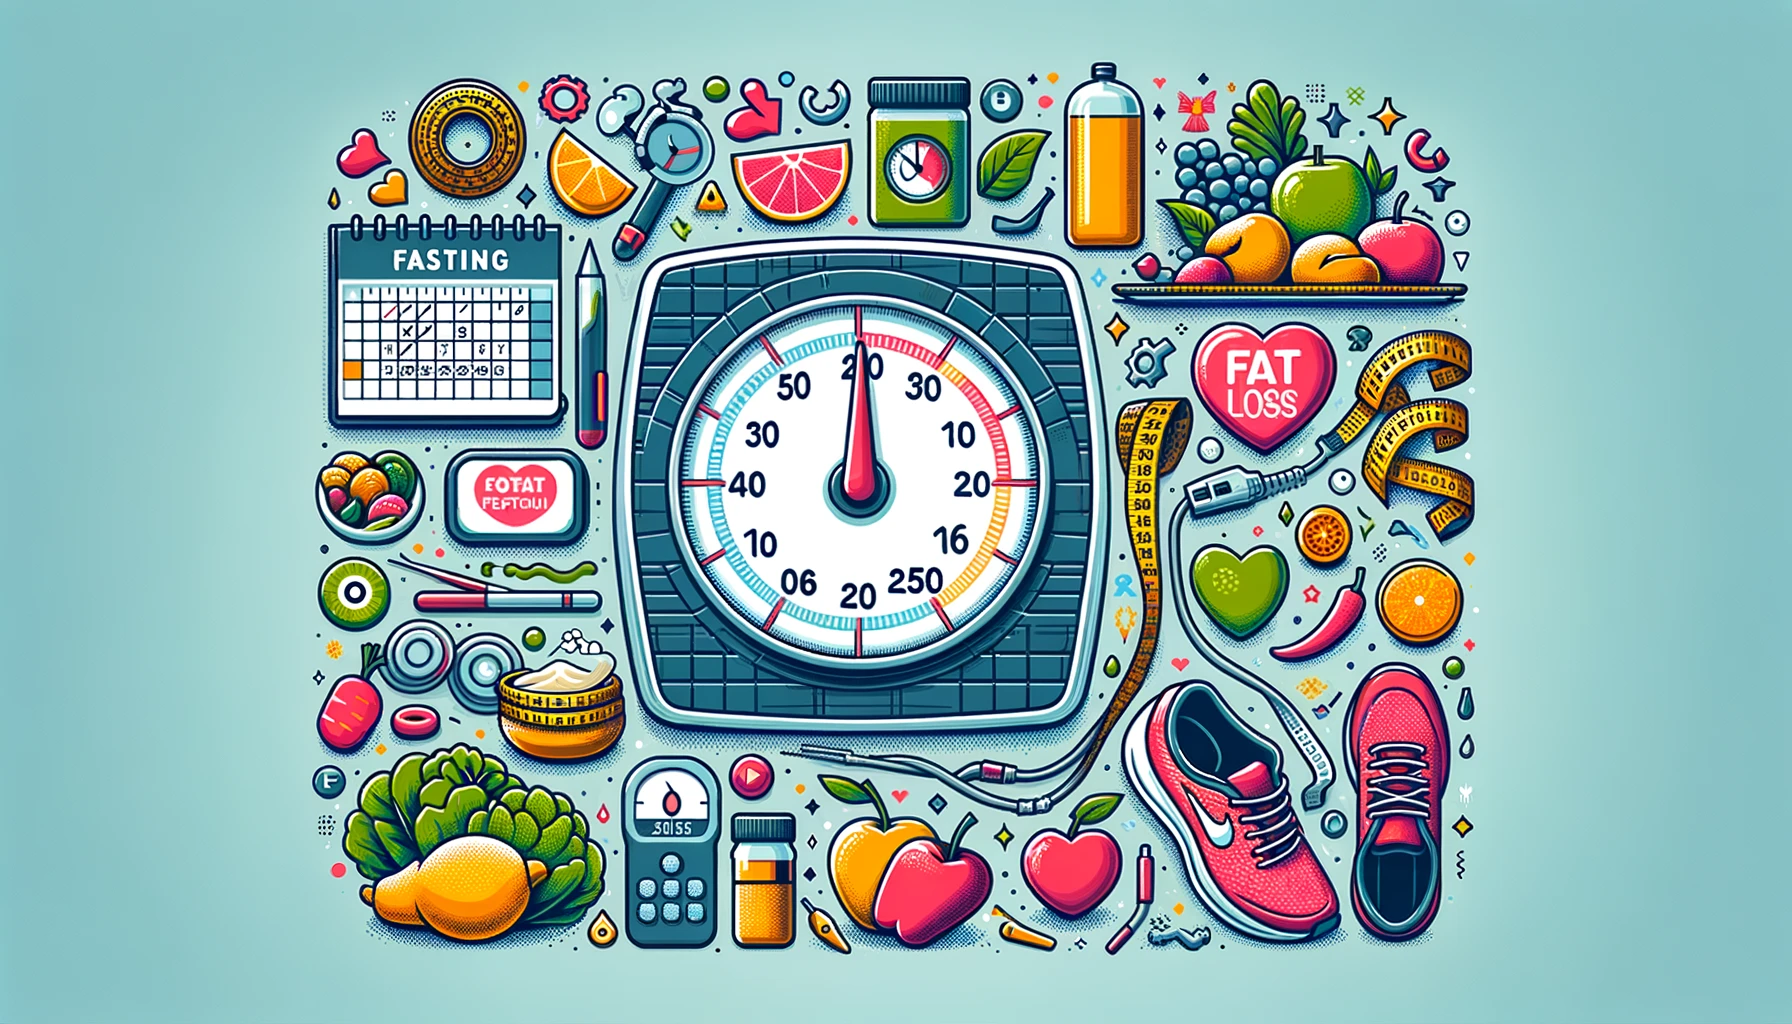 Weight loss through fasting depicted with scale, fasting calendar, healthy food, and exercise gear.